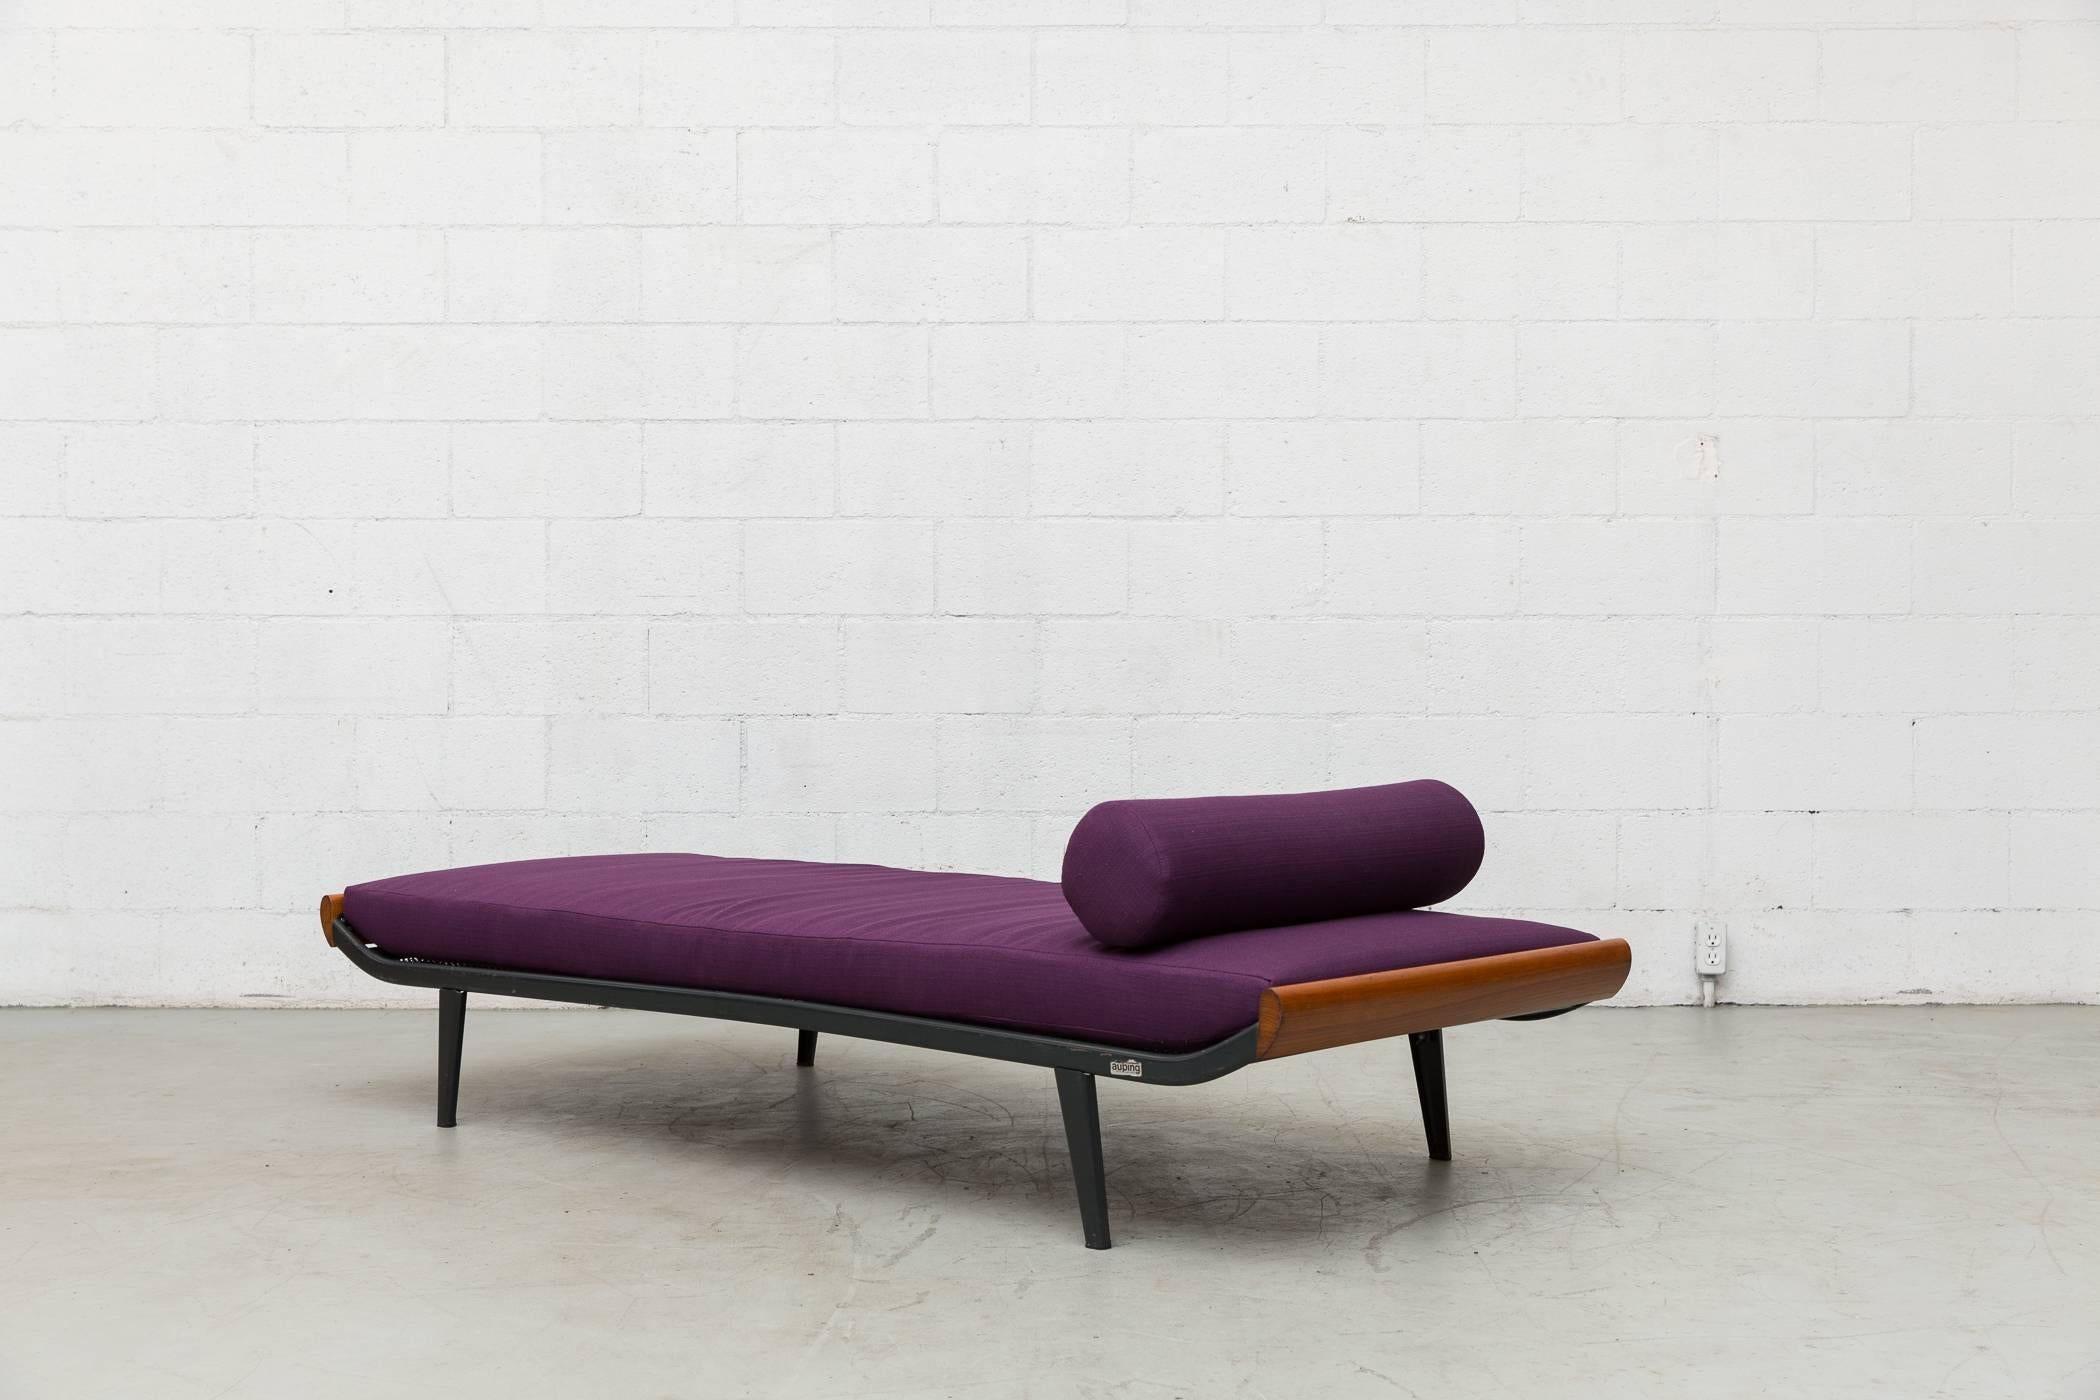 1960s Cleopatra daybed by A.R. Cordemeyer. Teak wood ends with enameled dark grey metal frame and Auping printed on mesh springs. New plum upholstered mattress and matching bolster. Frame in original condition with visible scratching to the enameled